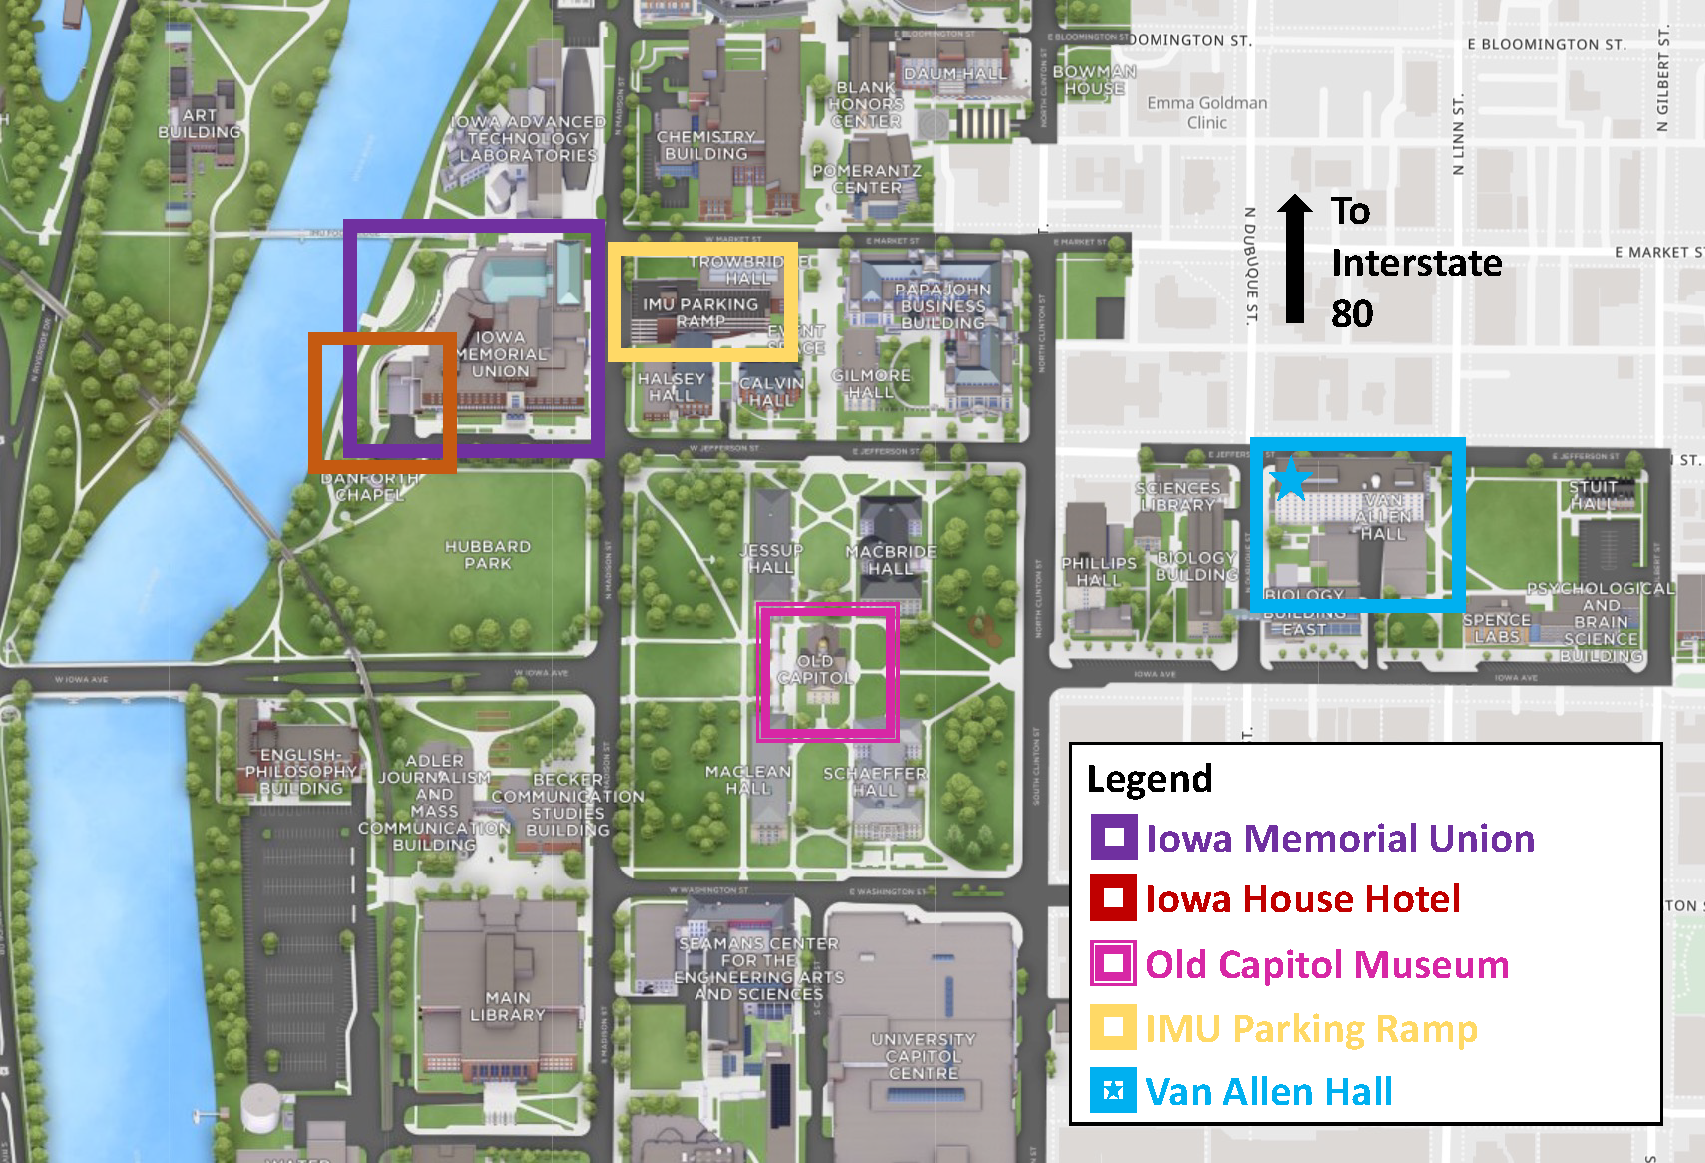 Map of CUWiP event spaces, including Van Allen Hall, Iowa Memorial Union, and Iowa House Hotel